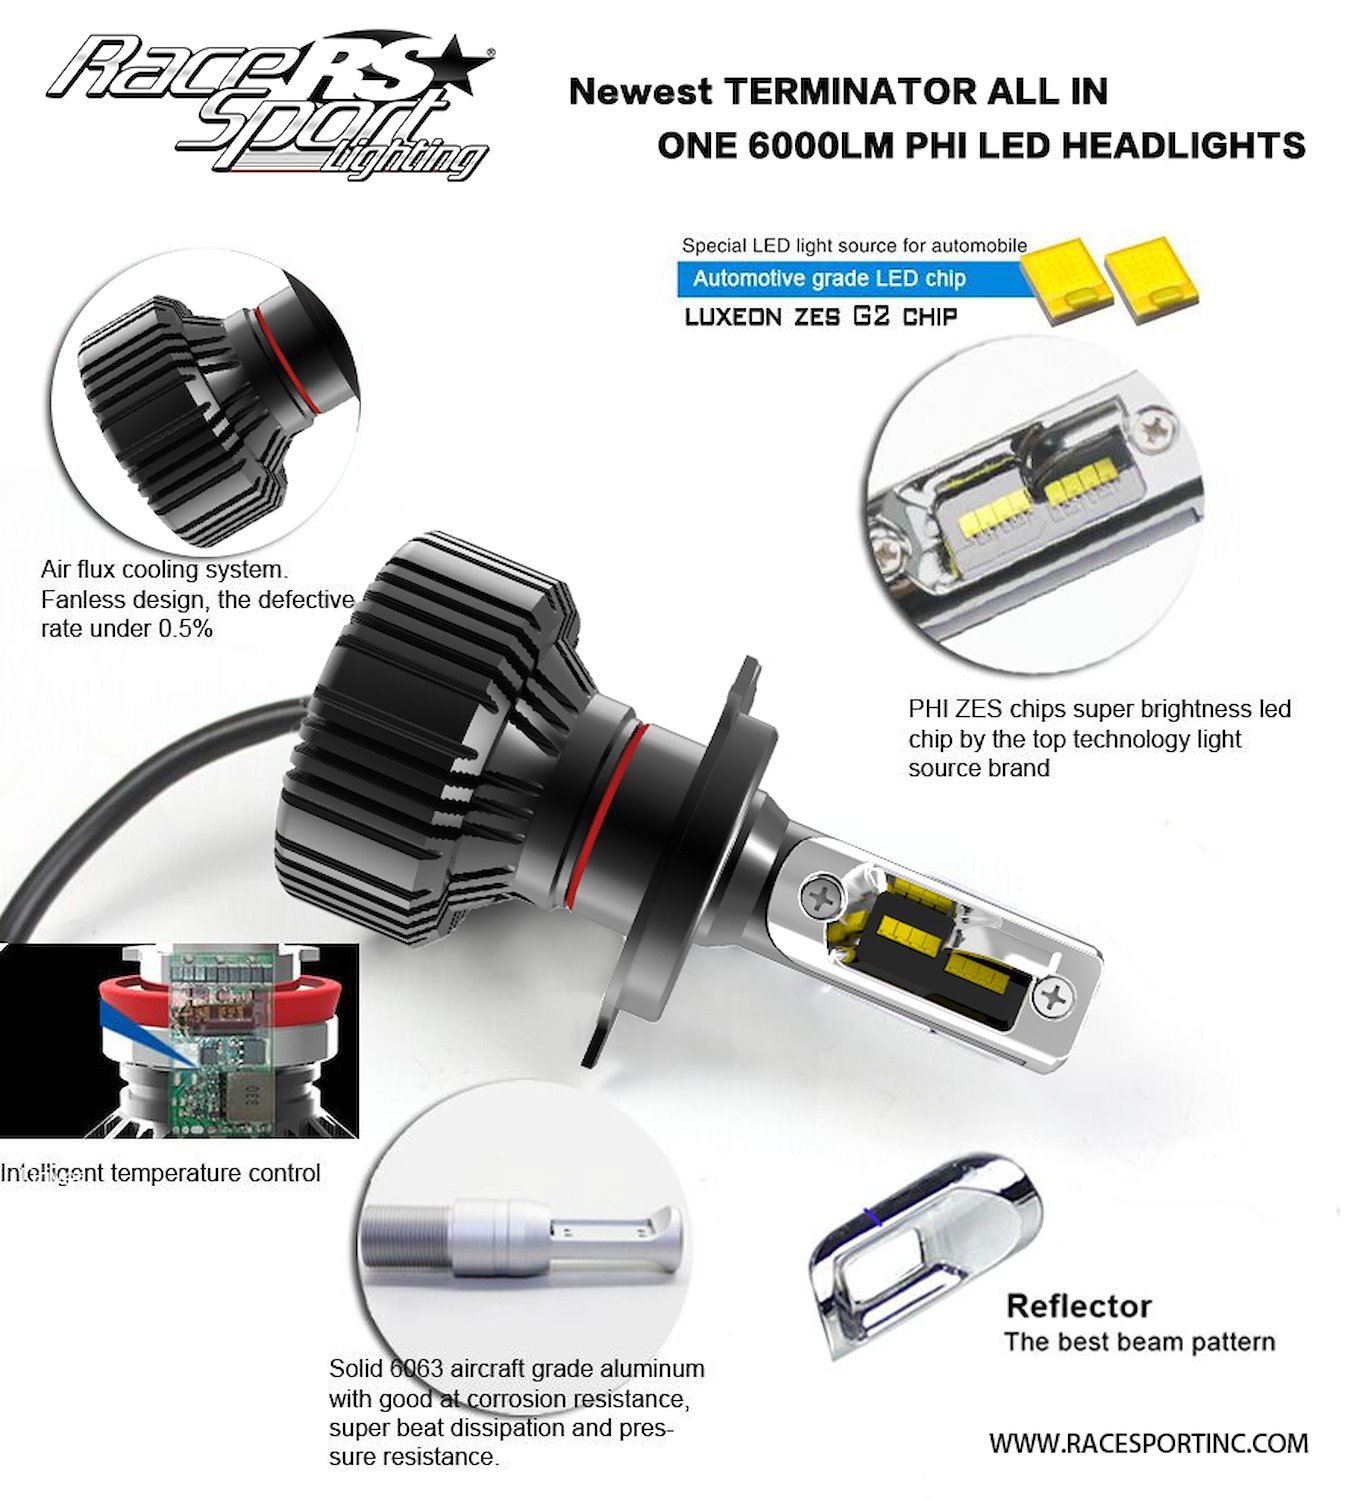 H3TLED Terminator-Series H3 Fan-less LED Conversion HeadLight Kit, w/ Pin Point Projection Optical Aims & Shallow Mount Design